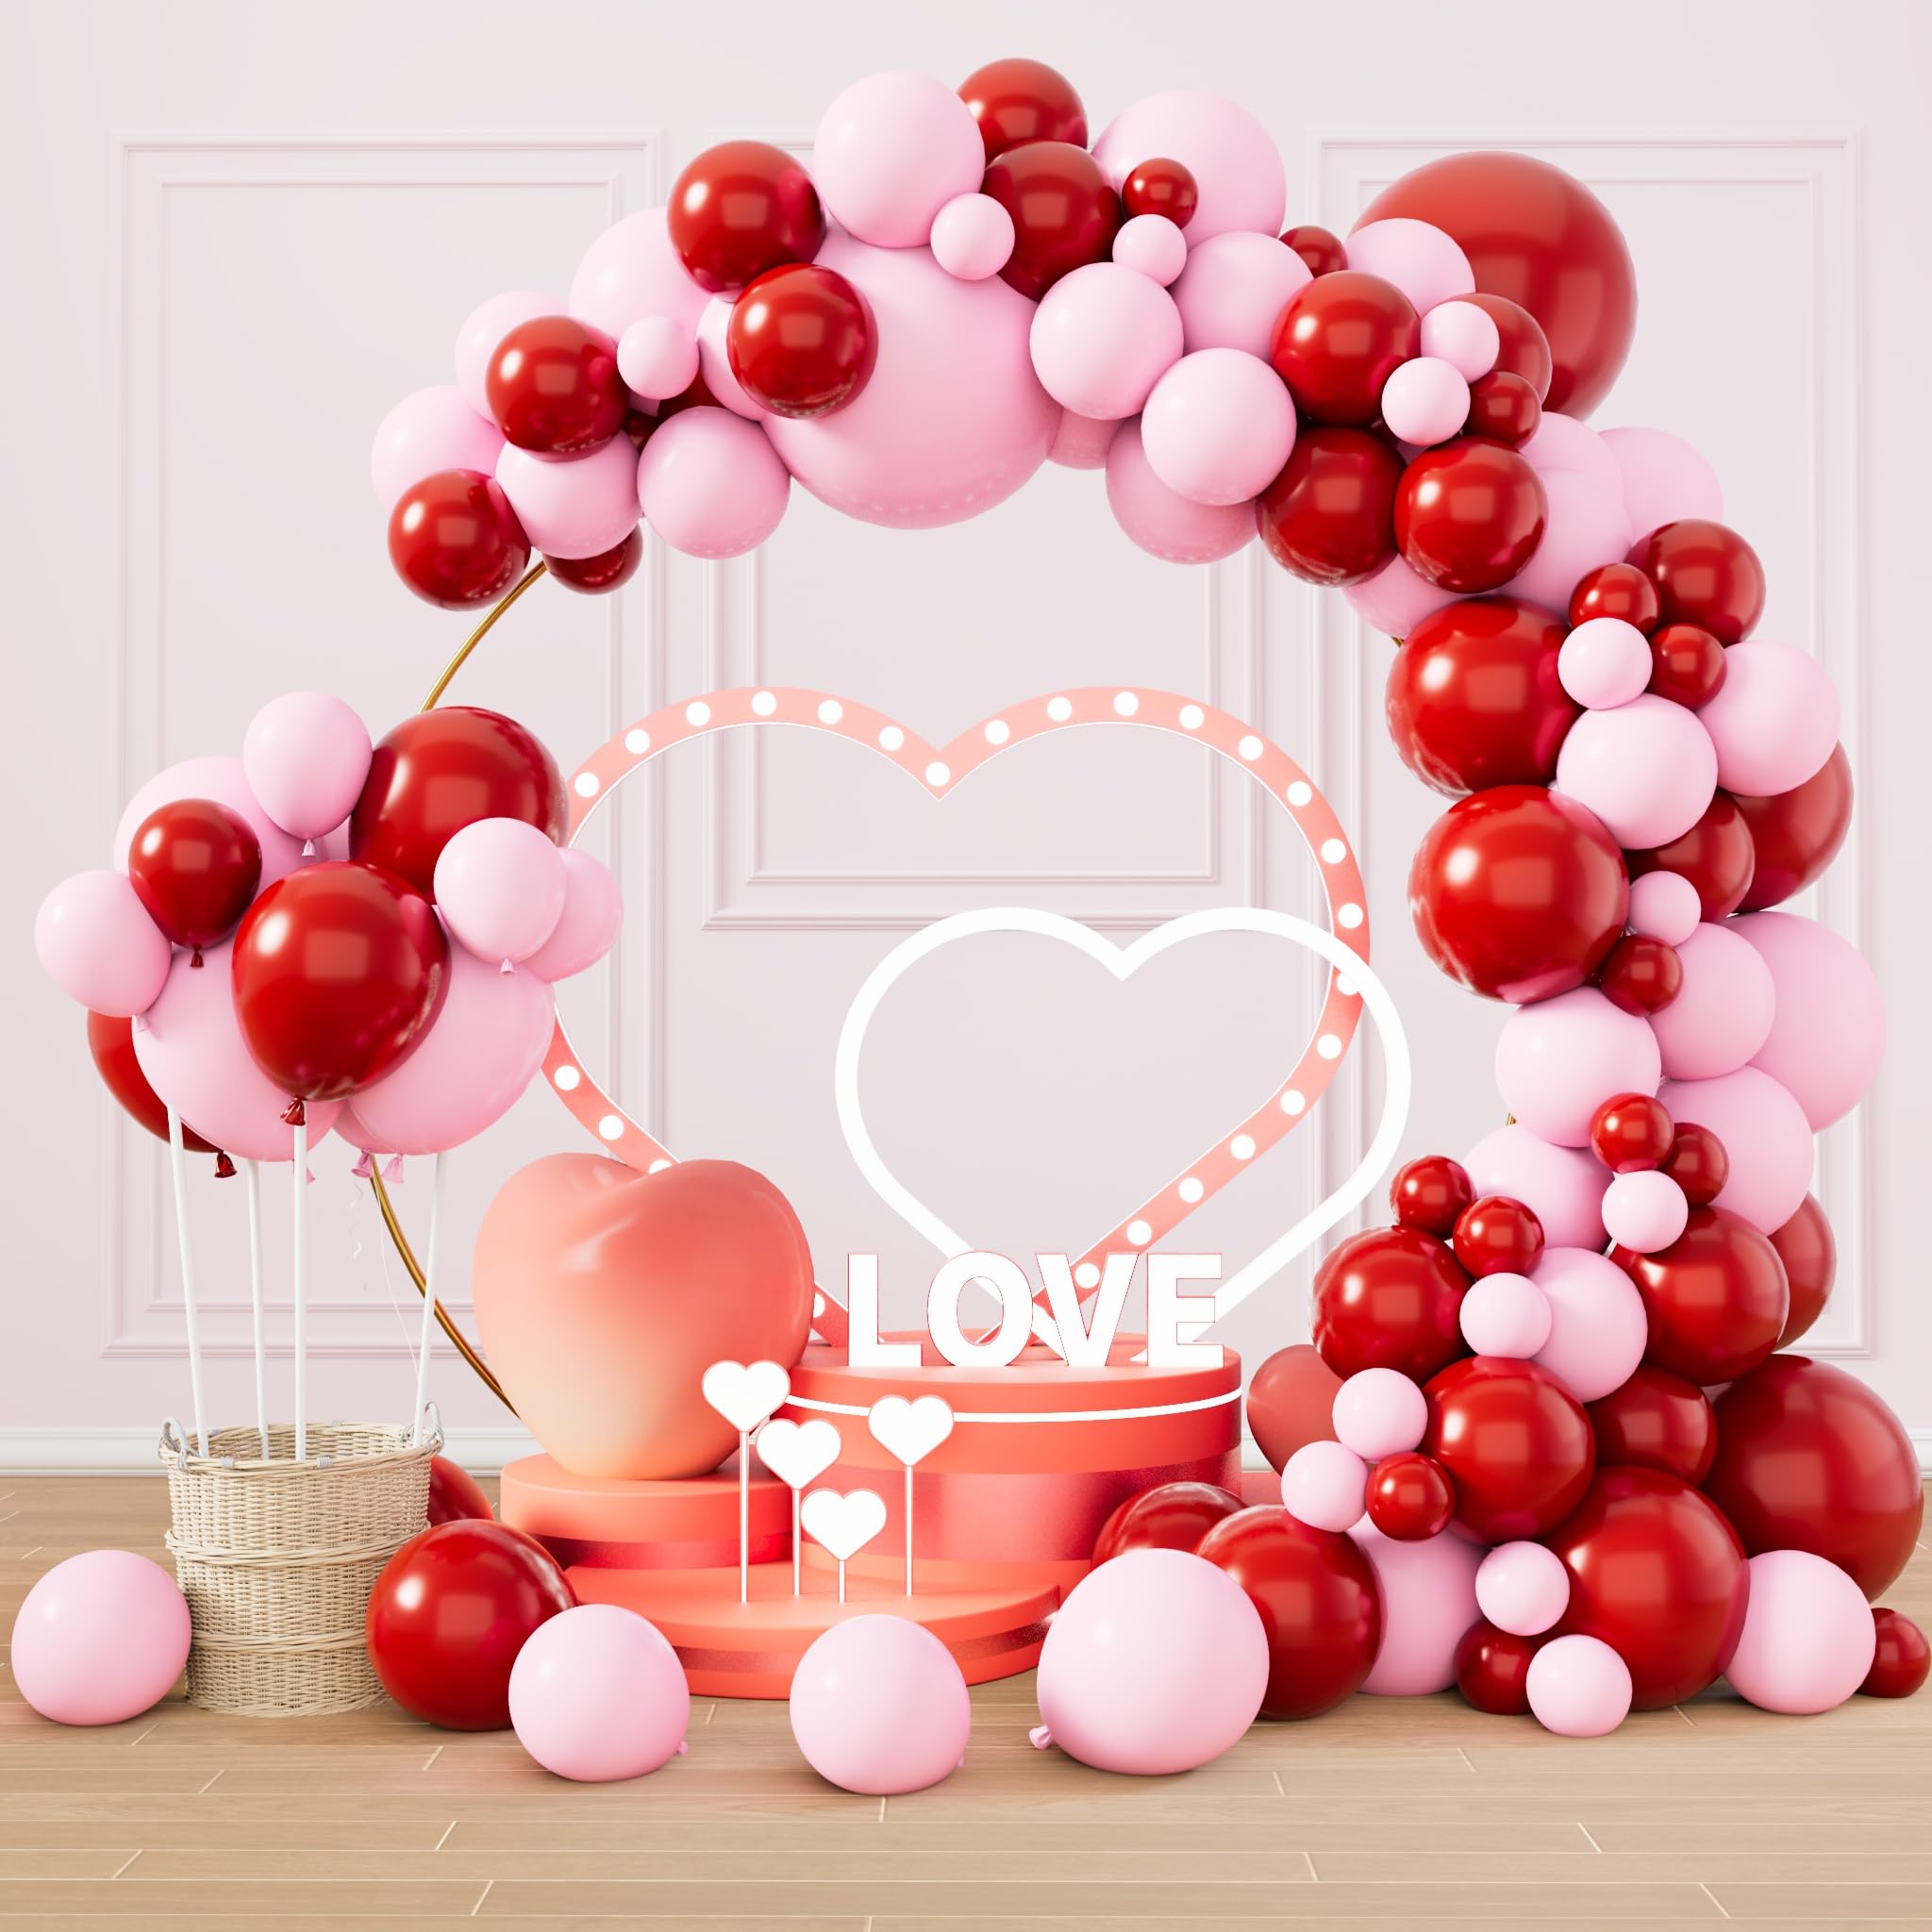 RUBFAC Pink and Ruby Red Balloons Valentine’s Day Different Sizes 105pcs 5/10/12/18 Inch for Garland Arch, Latex Balloons for Birthday Party Wedding Baby Shower Gender Reveal Party Decoration